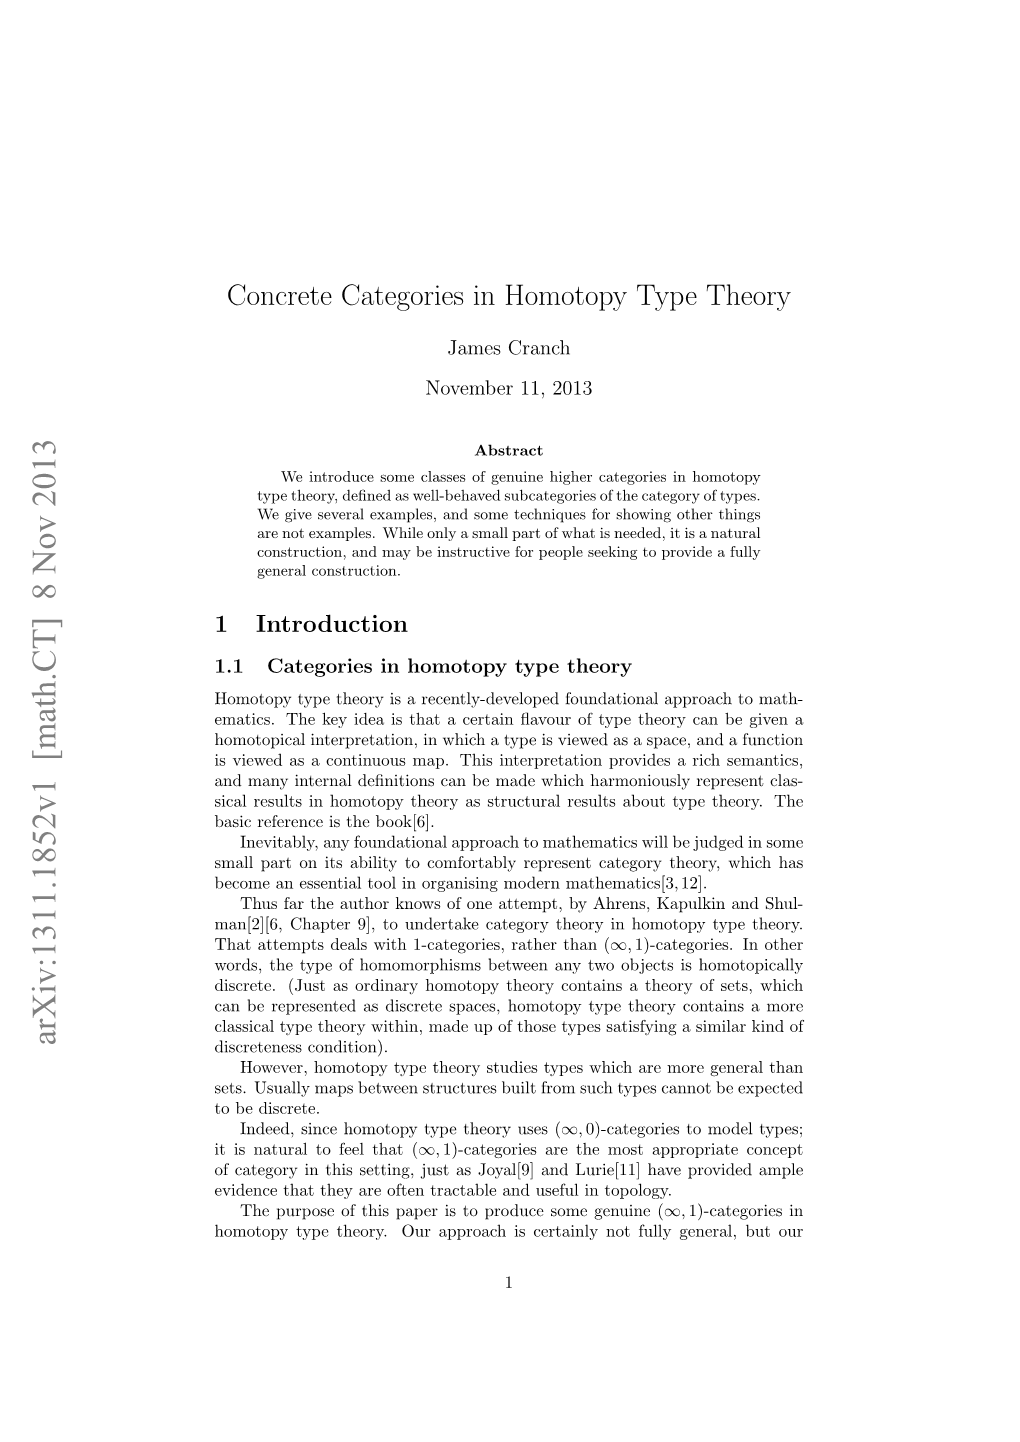 Concrete Categories in Homotopy Type Theory